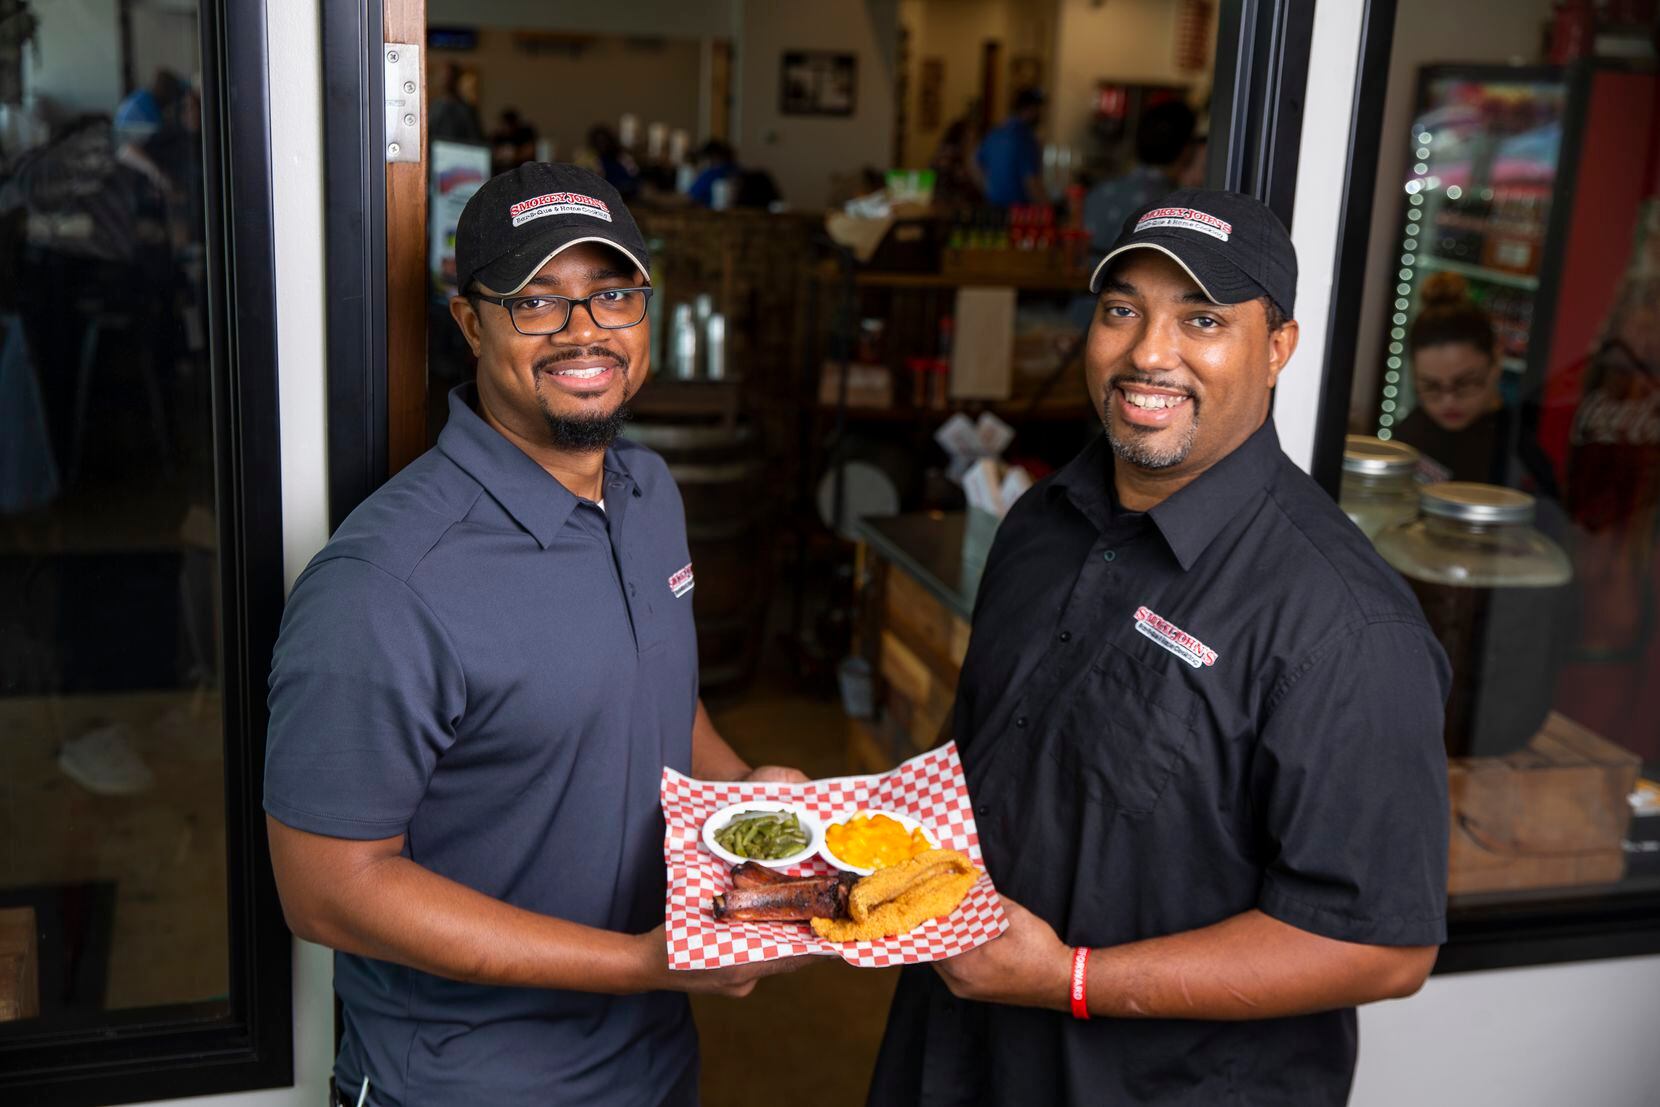 Brent, left, and Juan Reaves, right of Smokey John's Bar-B-Que in Dallas.